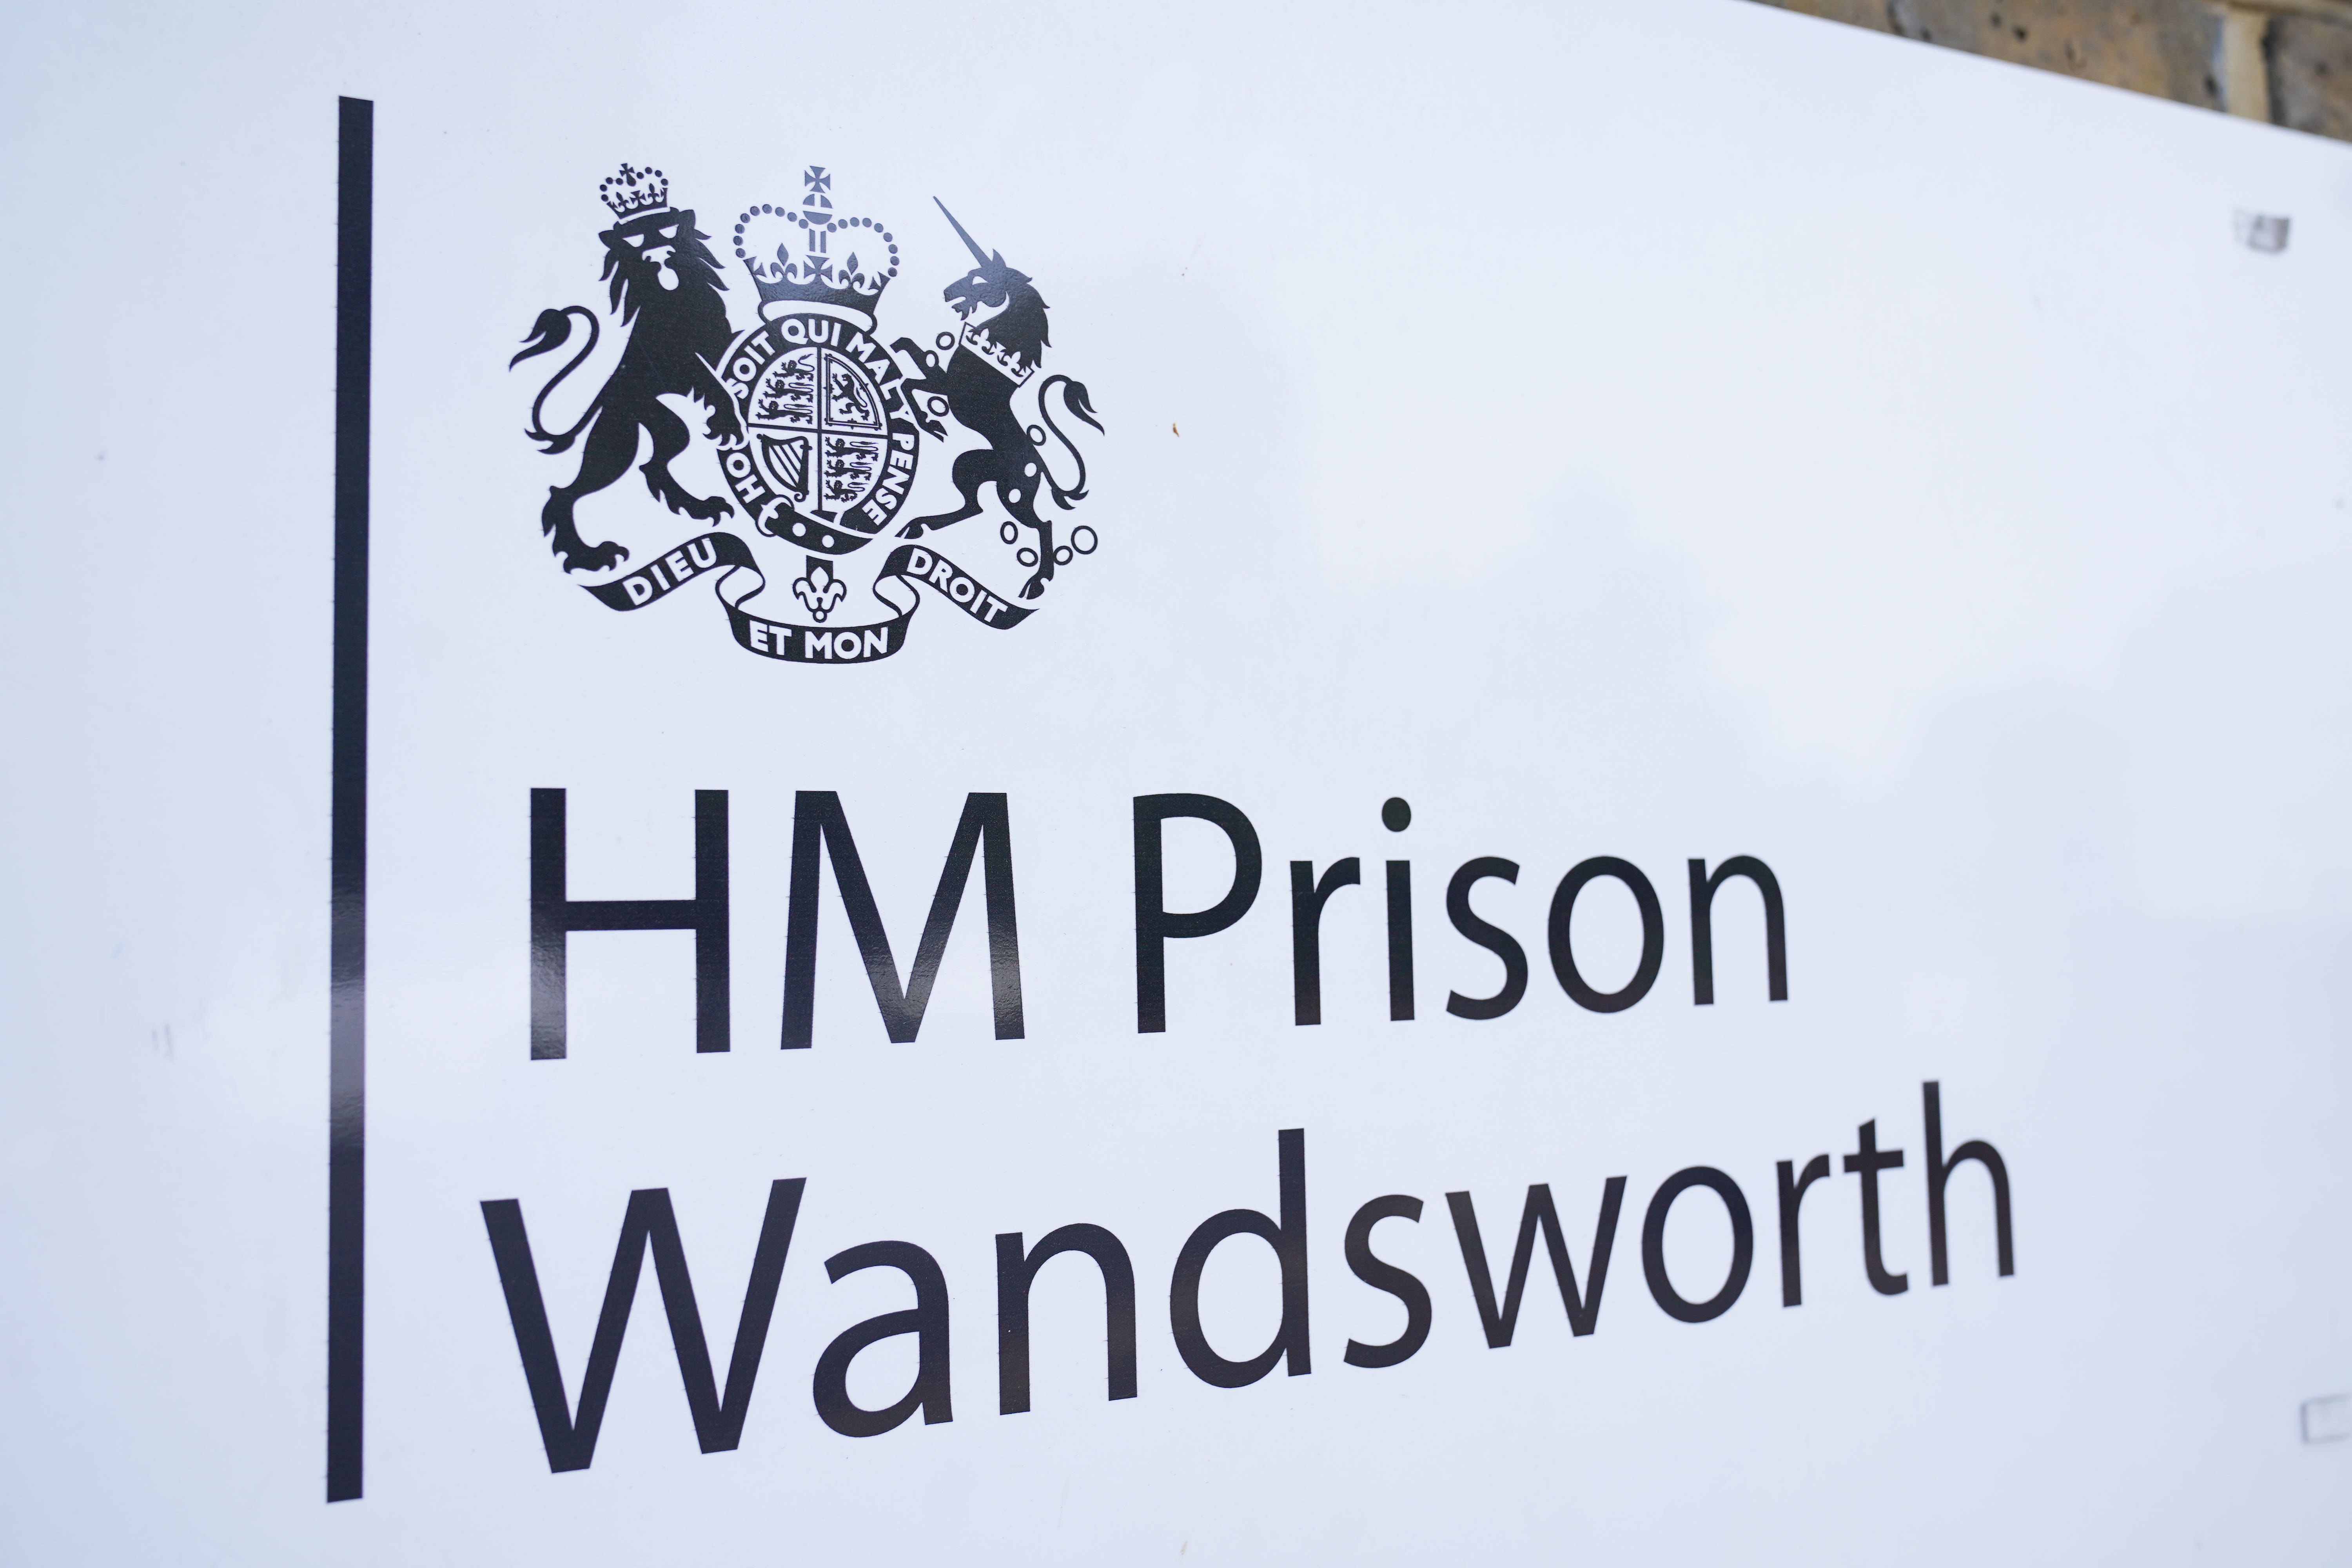 Daniel Khalife has pleaded not guilty to escaping from HMP Wandsworth on 6 September (Lucy North/PA)